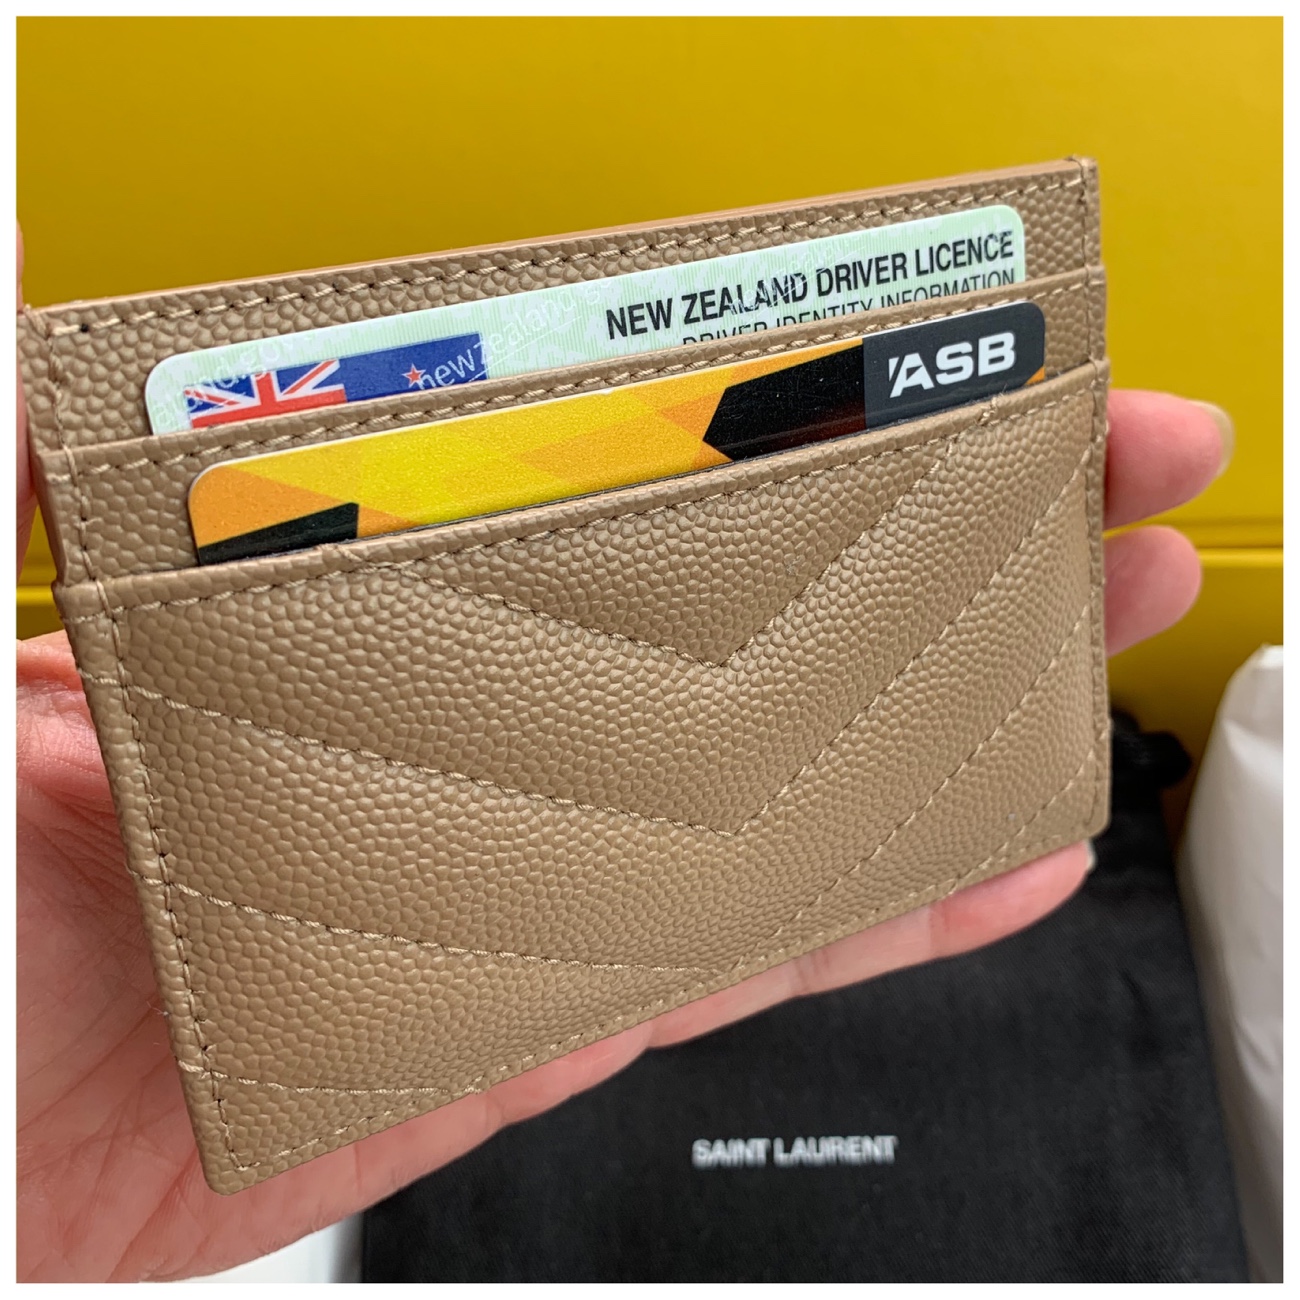 Quality issues with the Saint Laurent Ysl Card Holder Review 